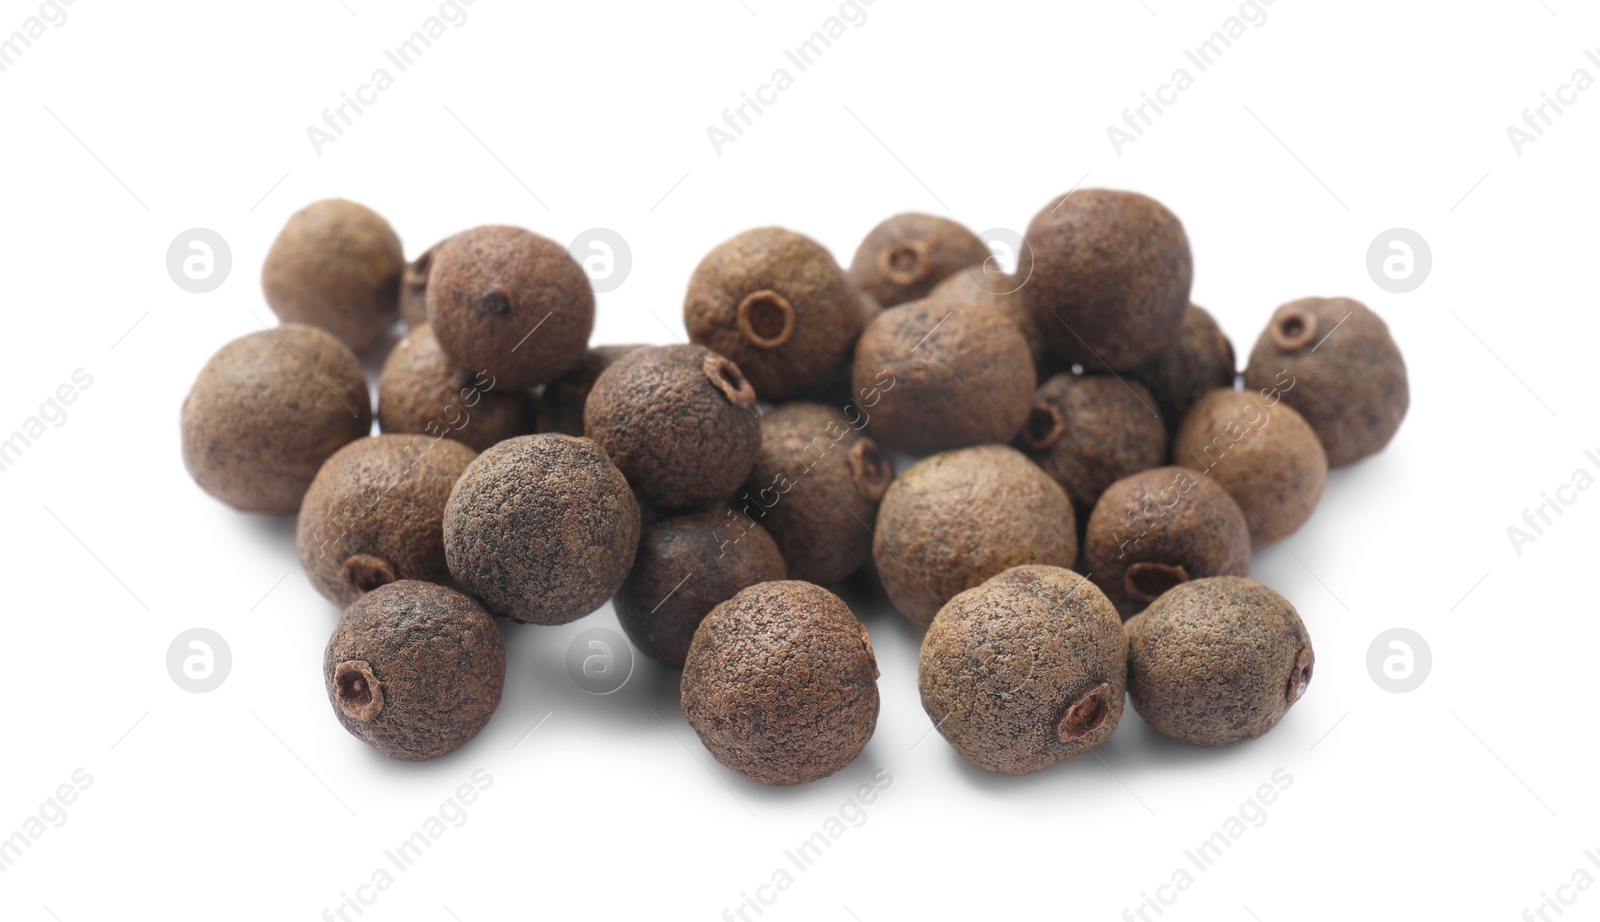 Photo of Dry allspice berries (Jamaica pepper) isolated on white